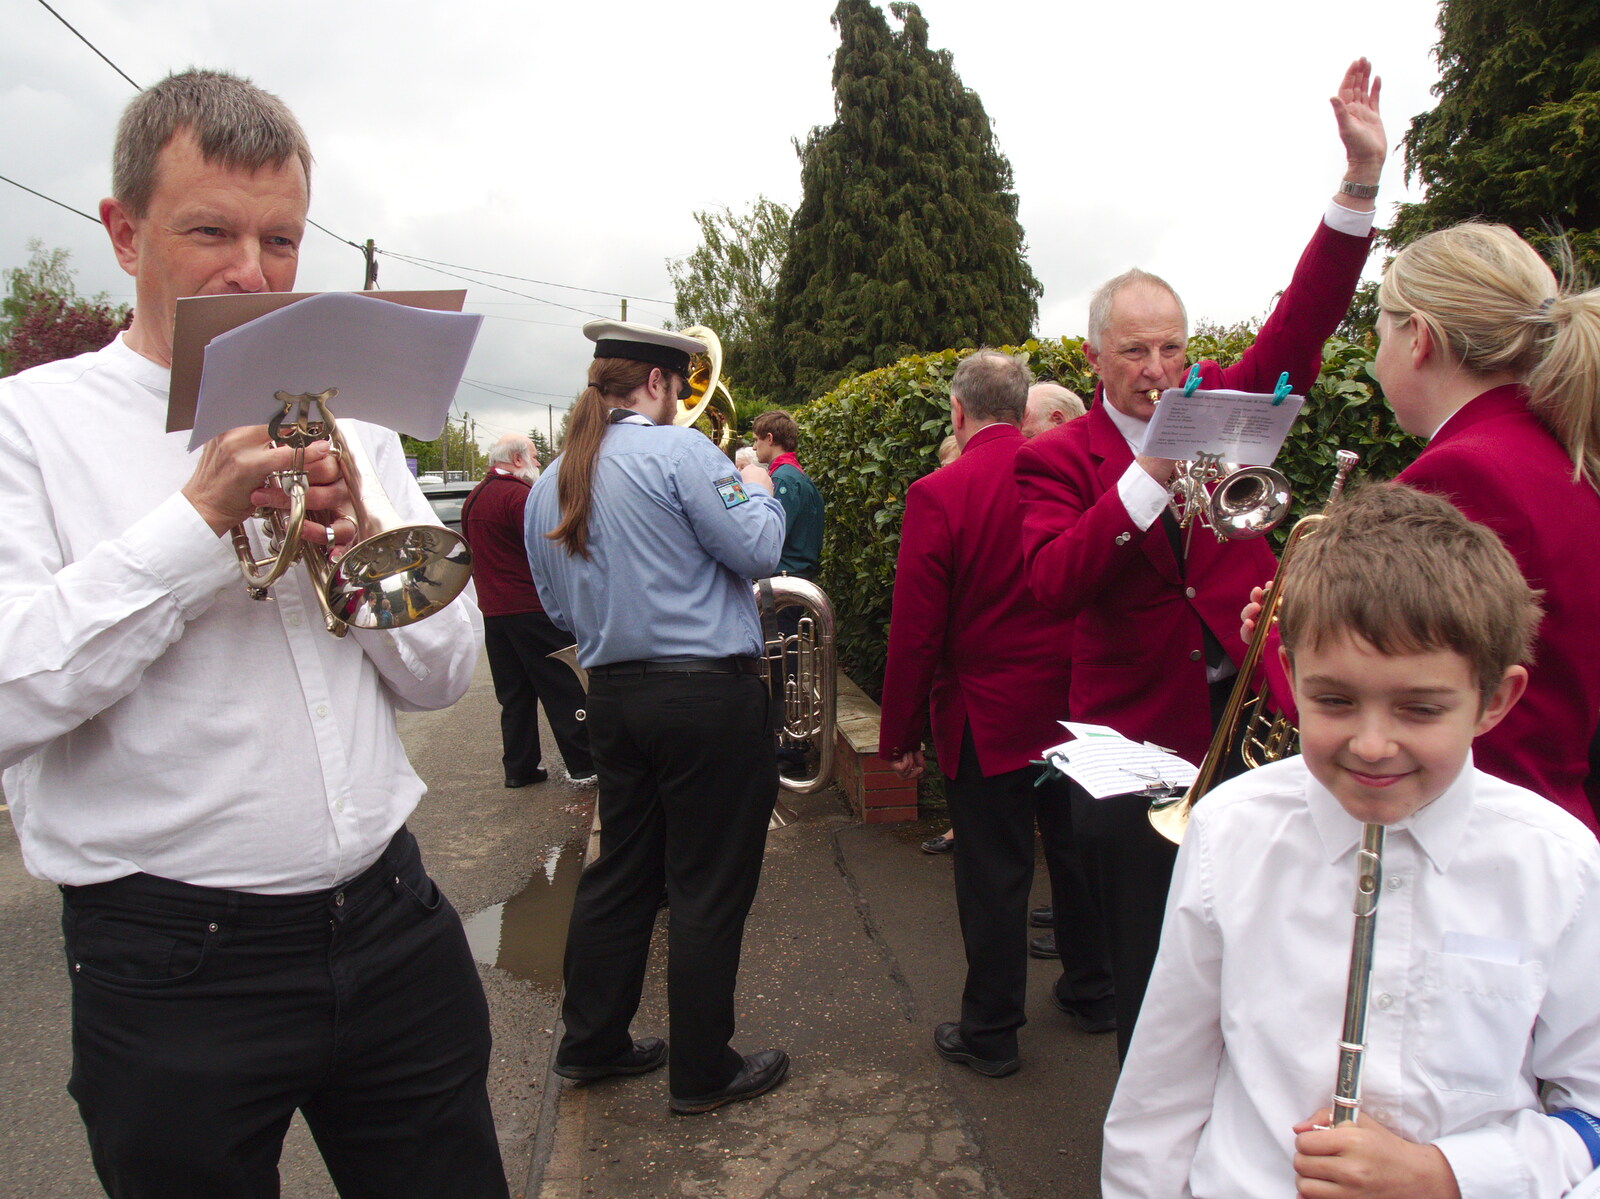 Nosher and Fred, who's on flute from A St. George's Day Parade, Dickleburgh, Norfolk - 28th April 2019